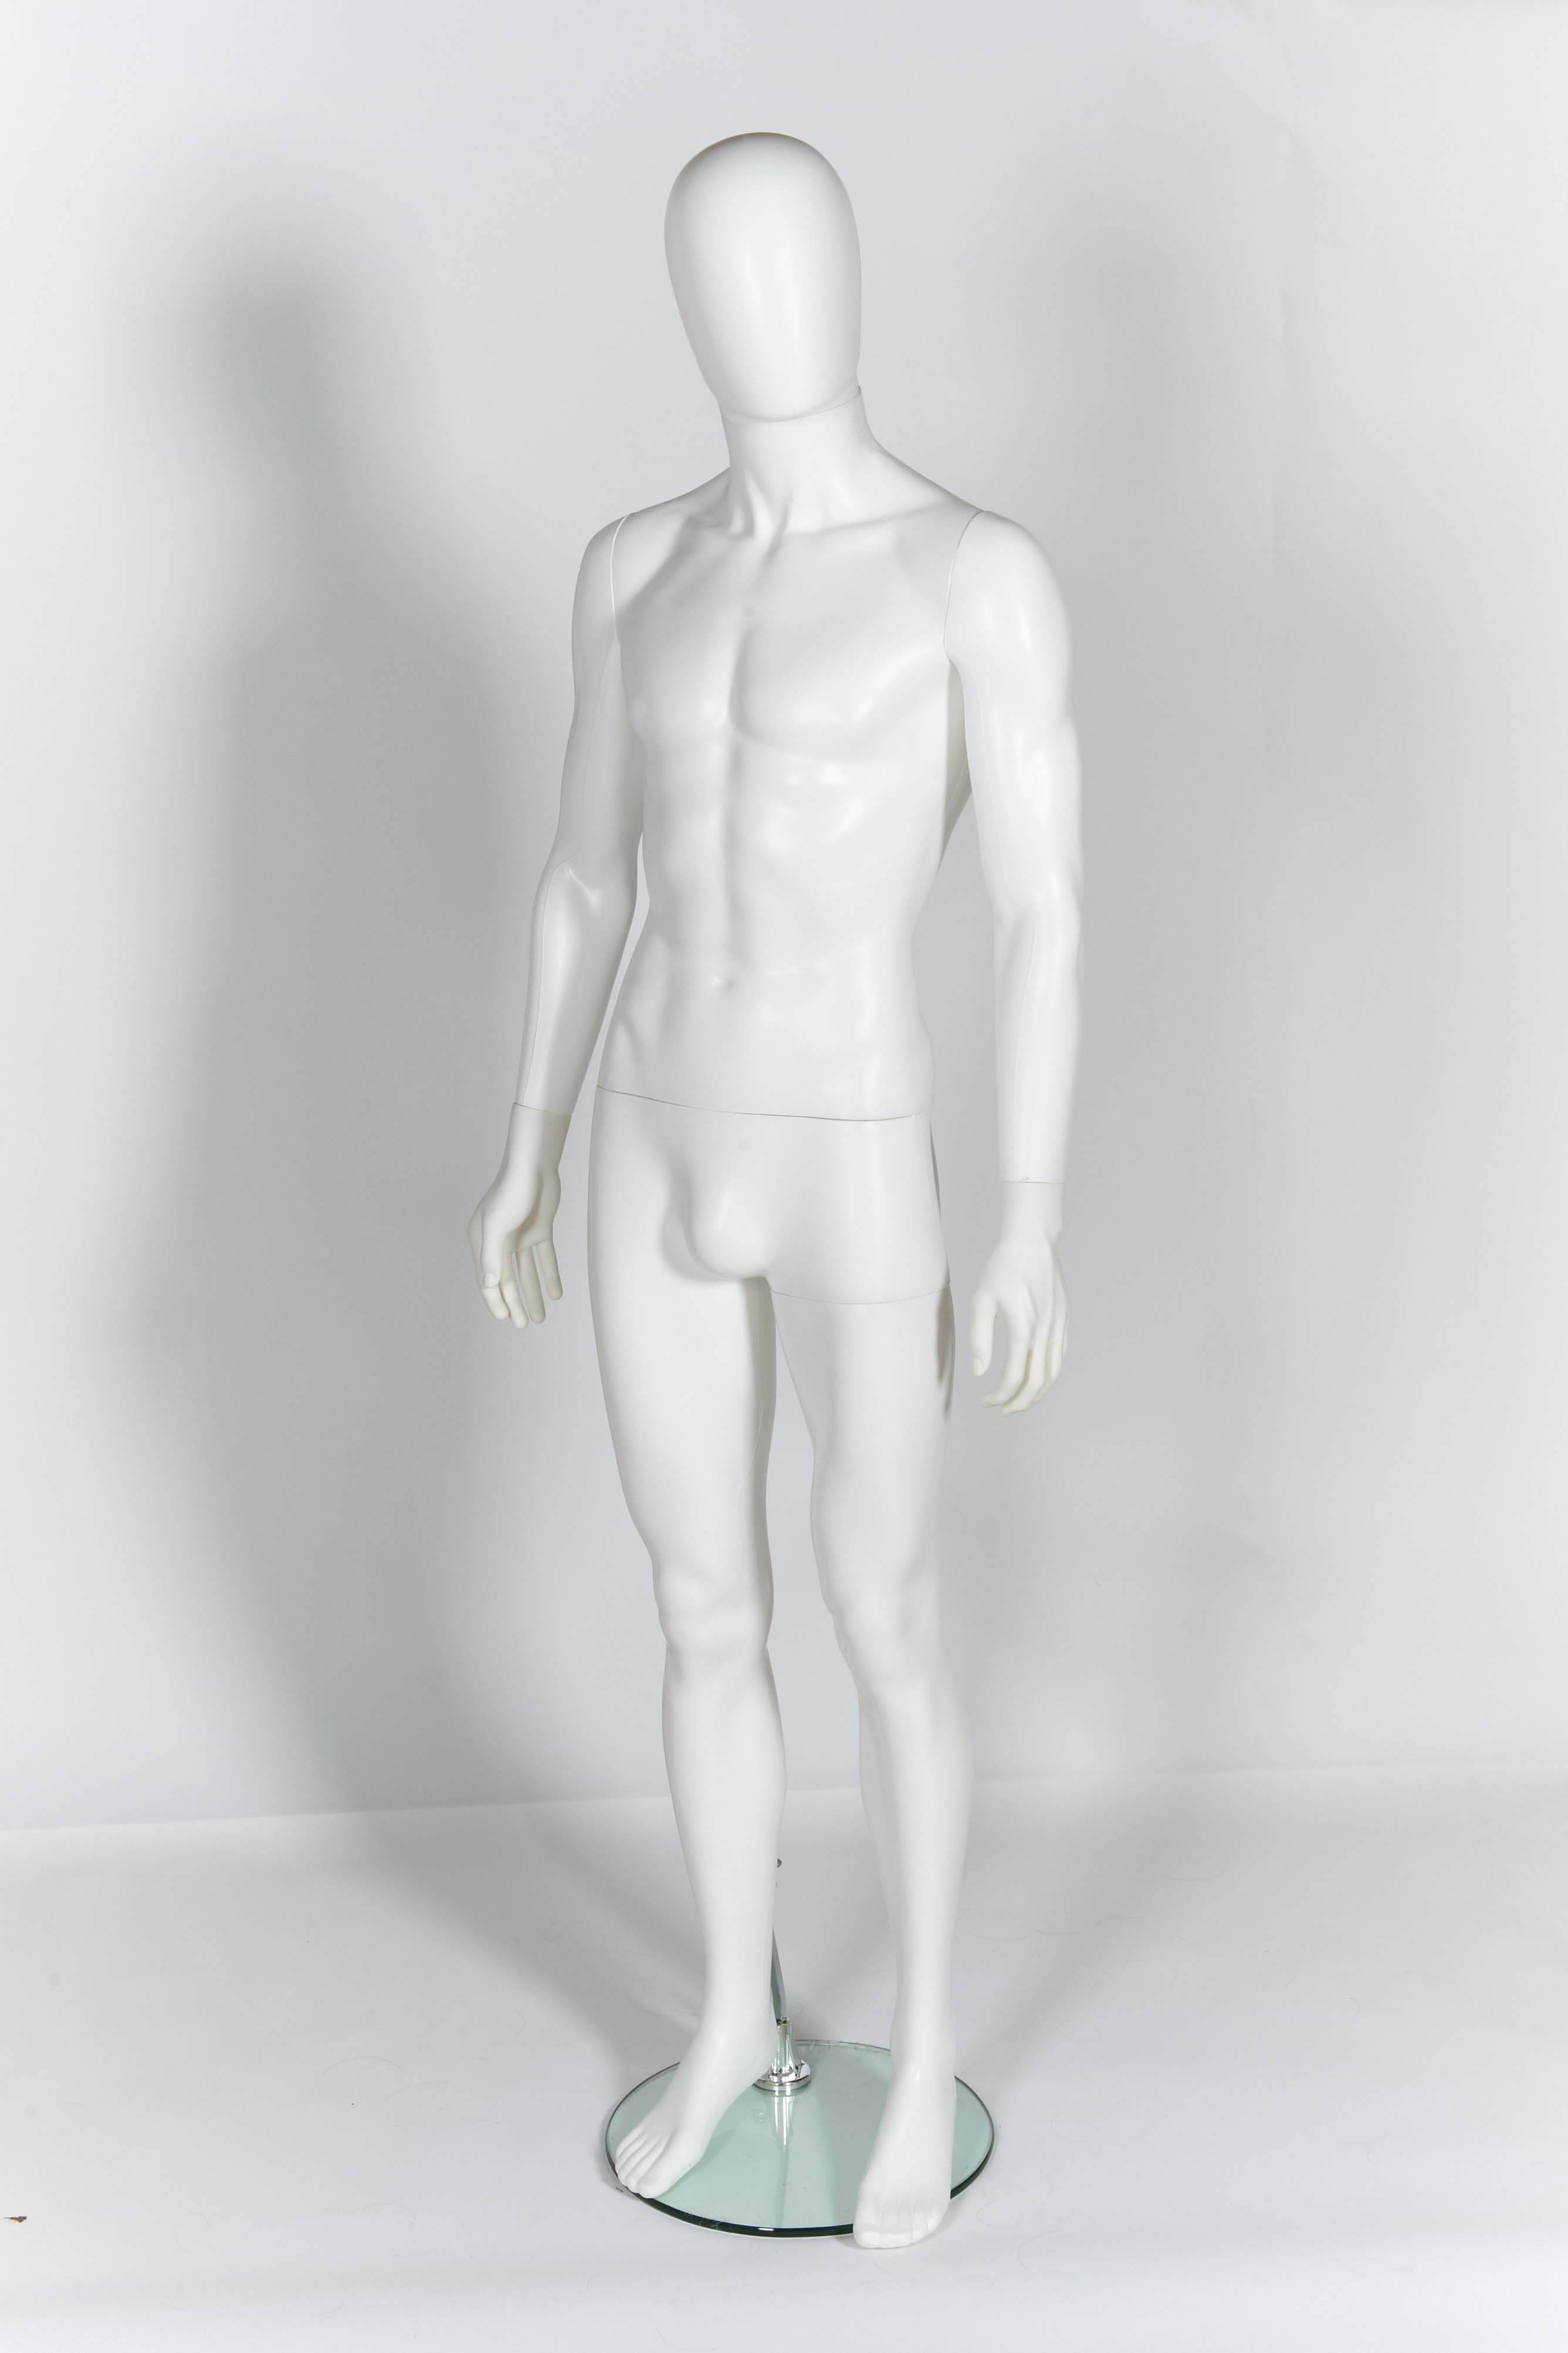 Only Hangers Male Torso Plastic Hanging Mannequin Body Form Clear Frosted Pack of 1 